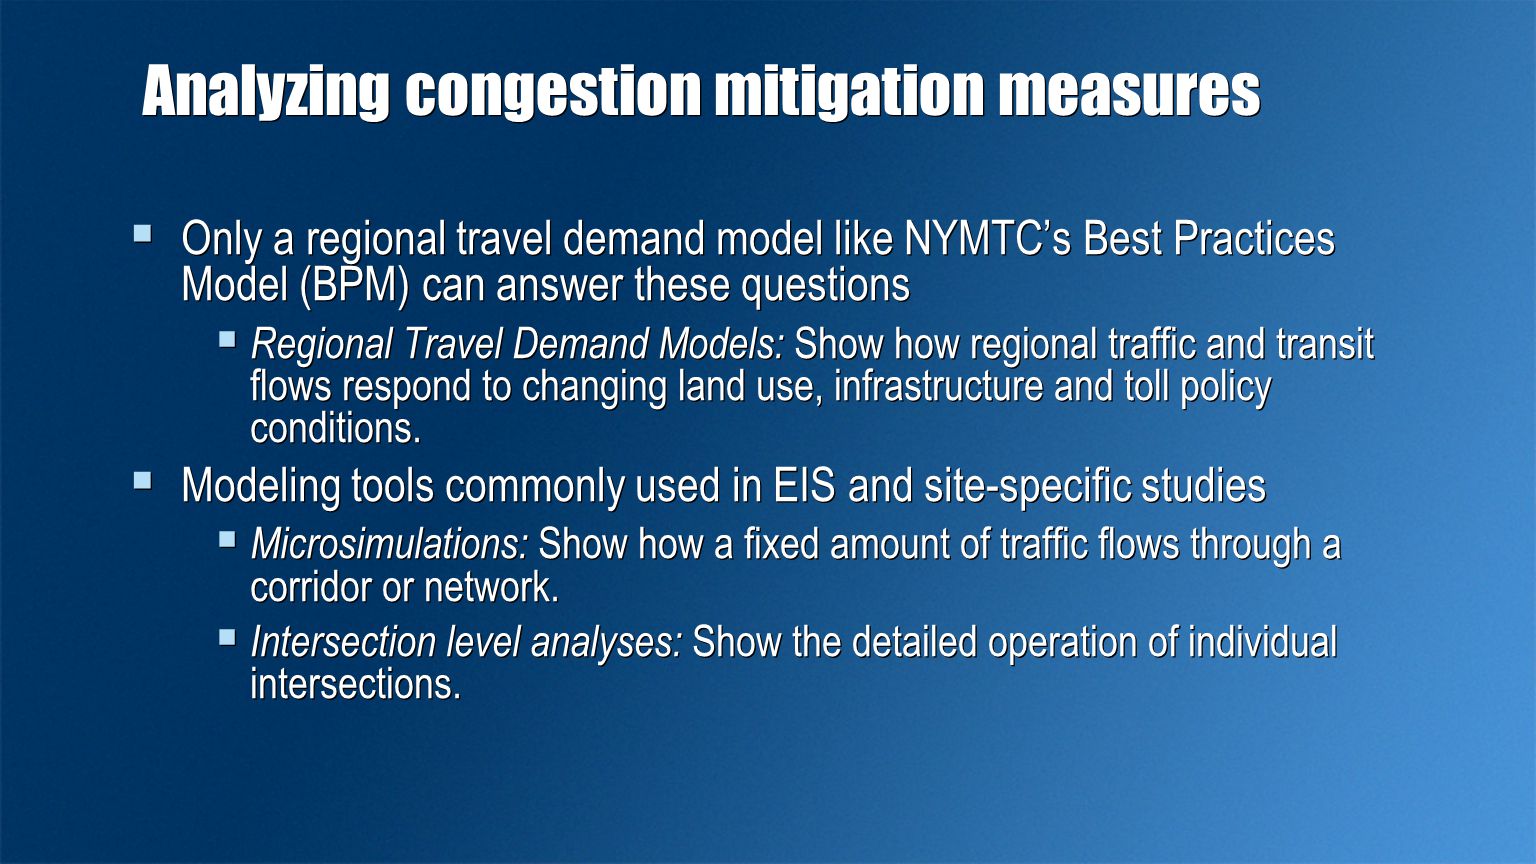 Analyzing congestion mitigation measures  Only a regional travel demand model like NYMTC’s Best Practices Model (BPM) can answer these questions  Regional Travel Demand Models: Show how regional traffic and transit flows respond to changing land use, infrastructure and toll policy conditions.